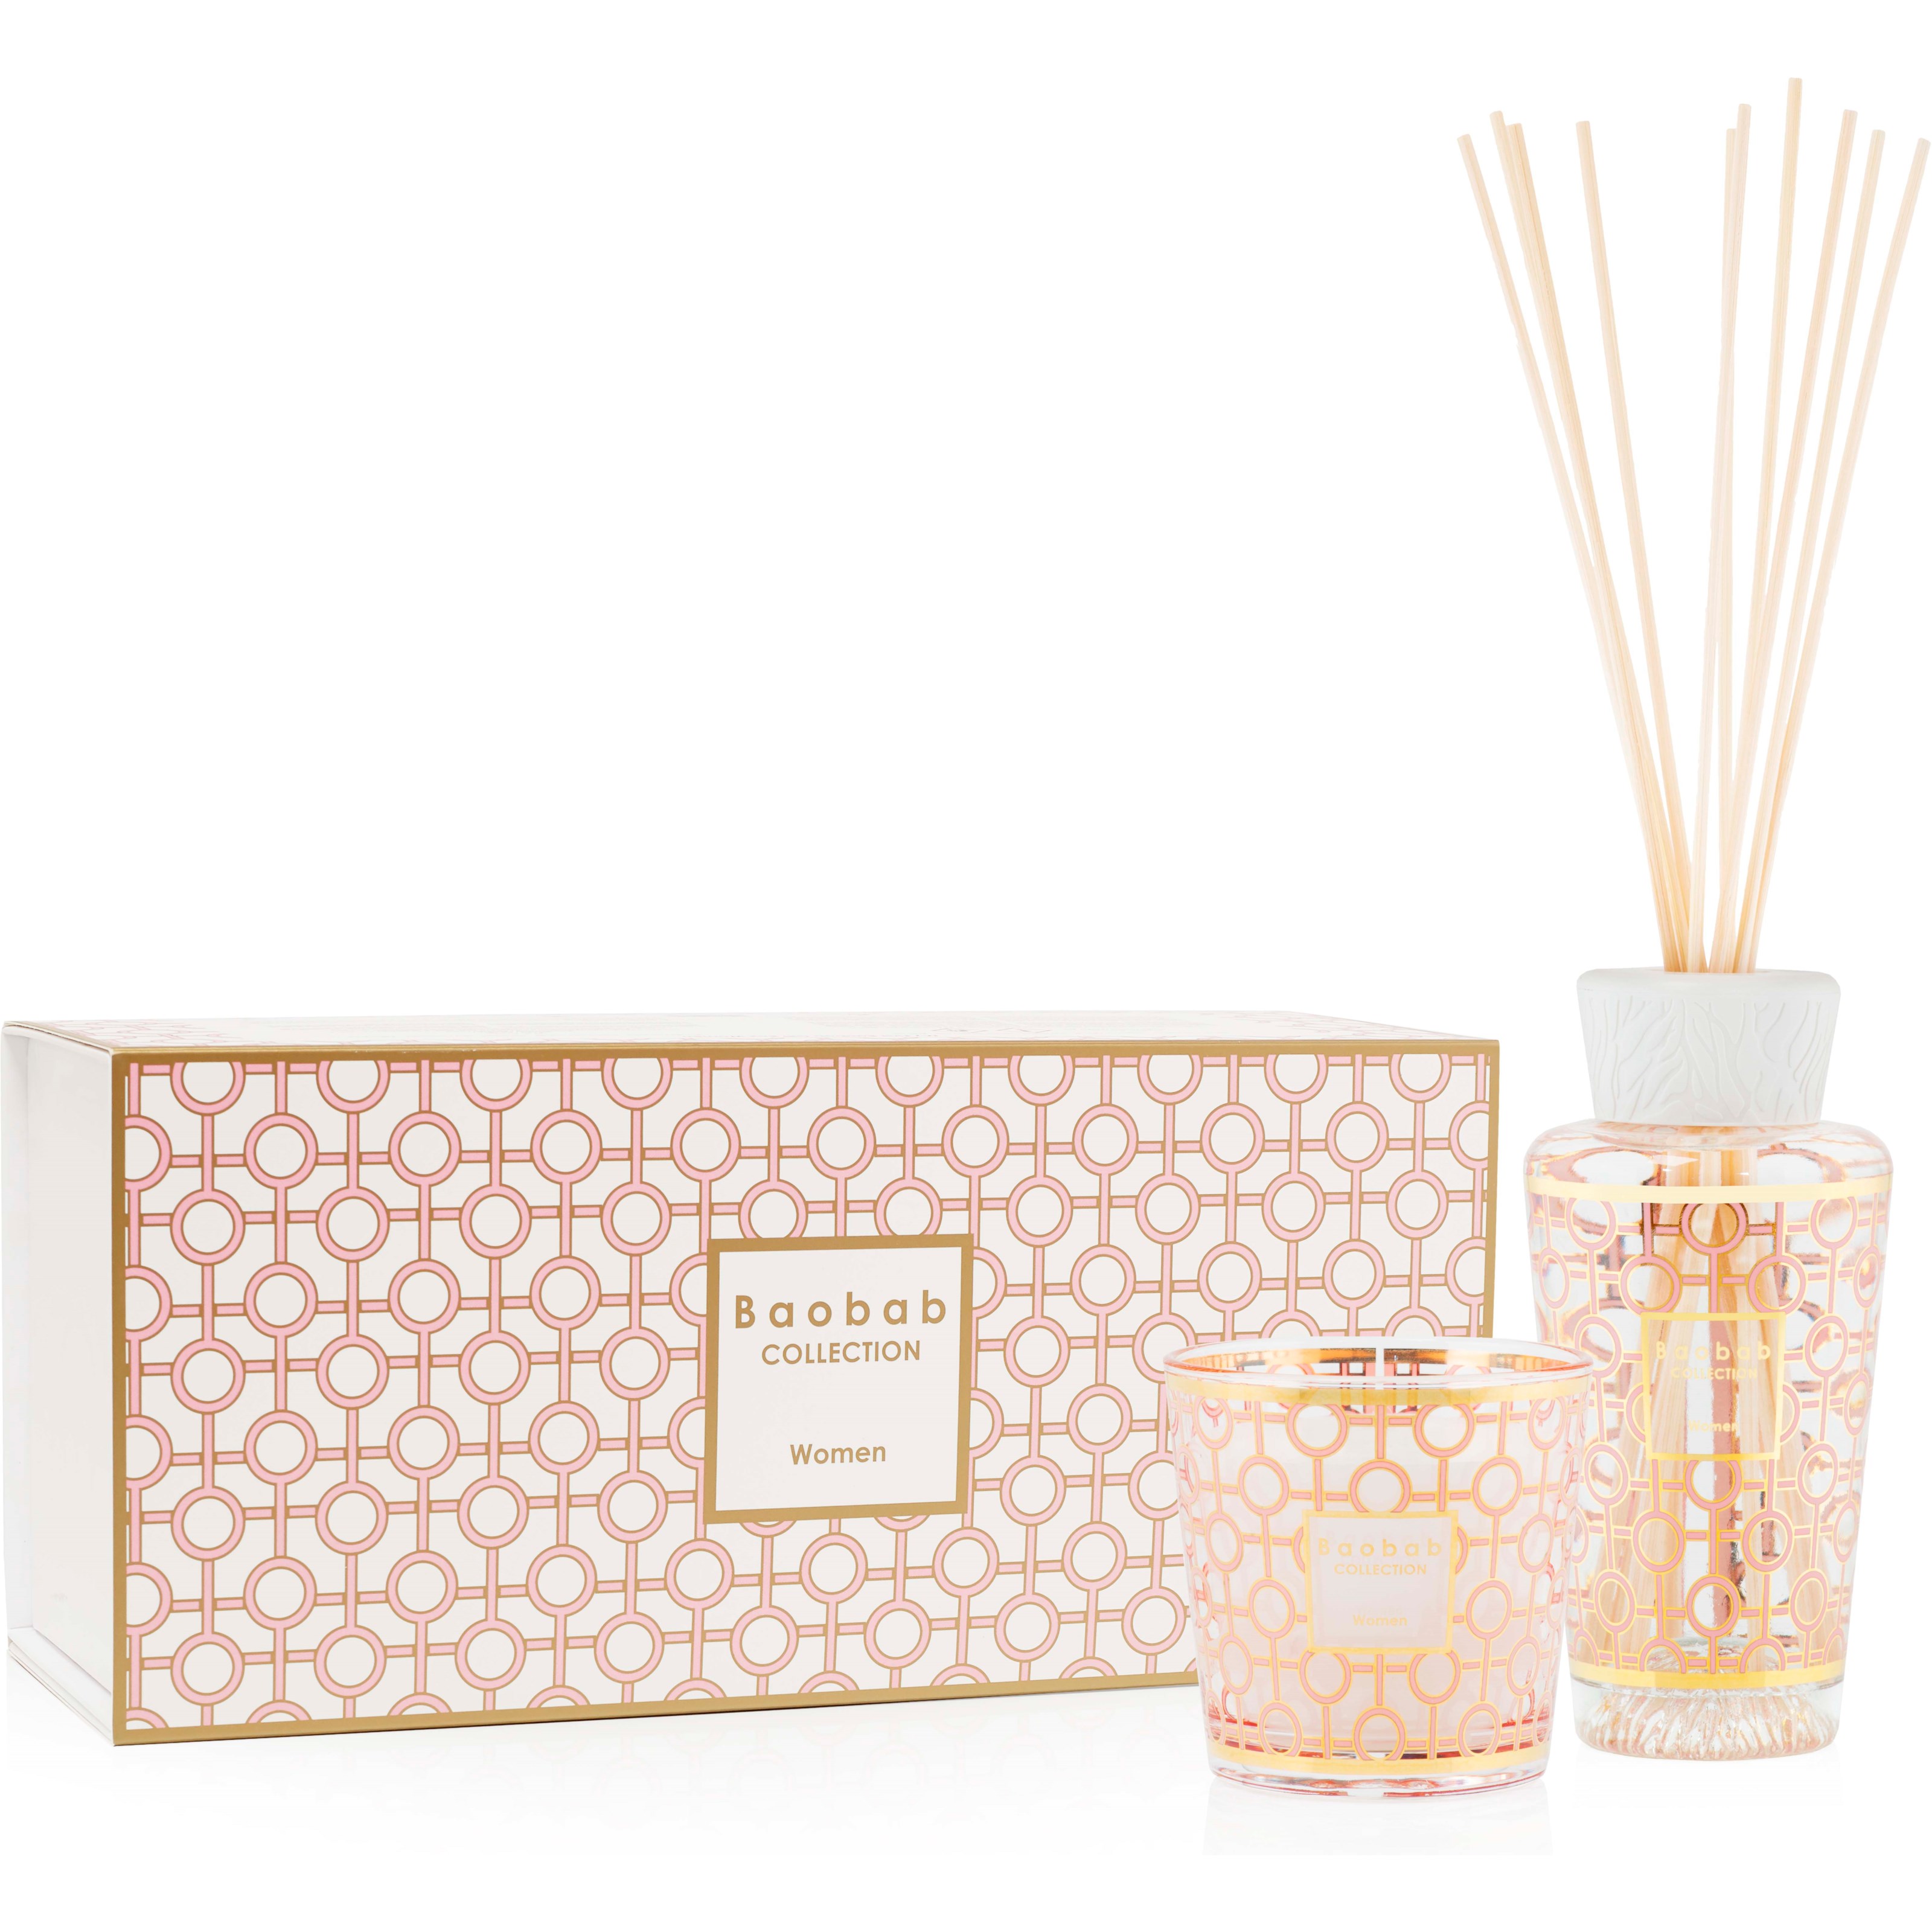 Baobab Collection Women Gift Box Fragranced Candle + Diffuser